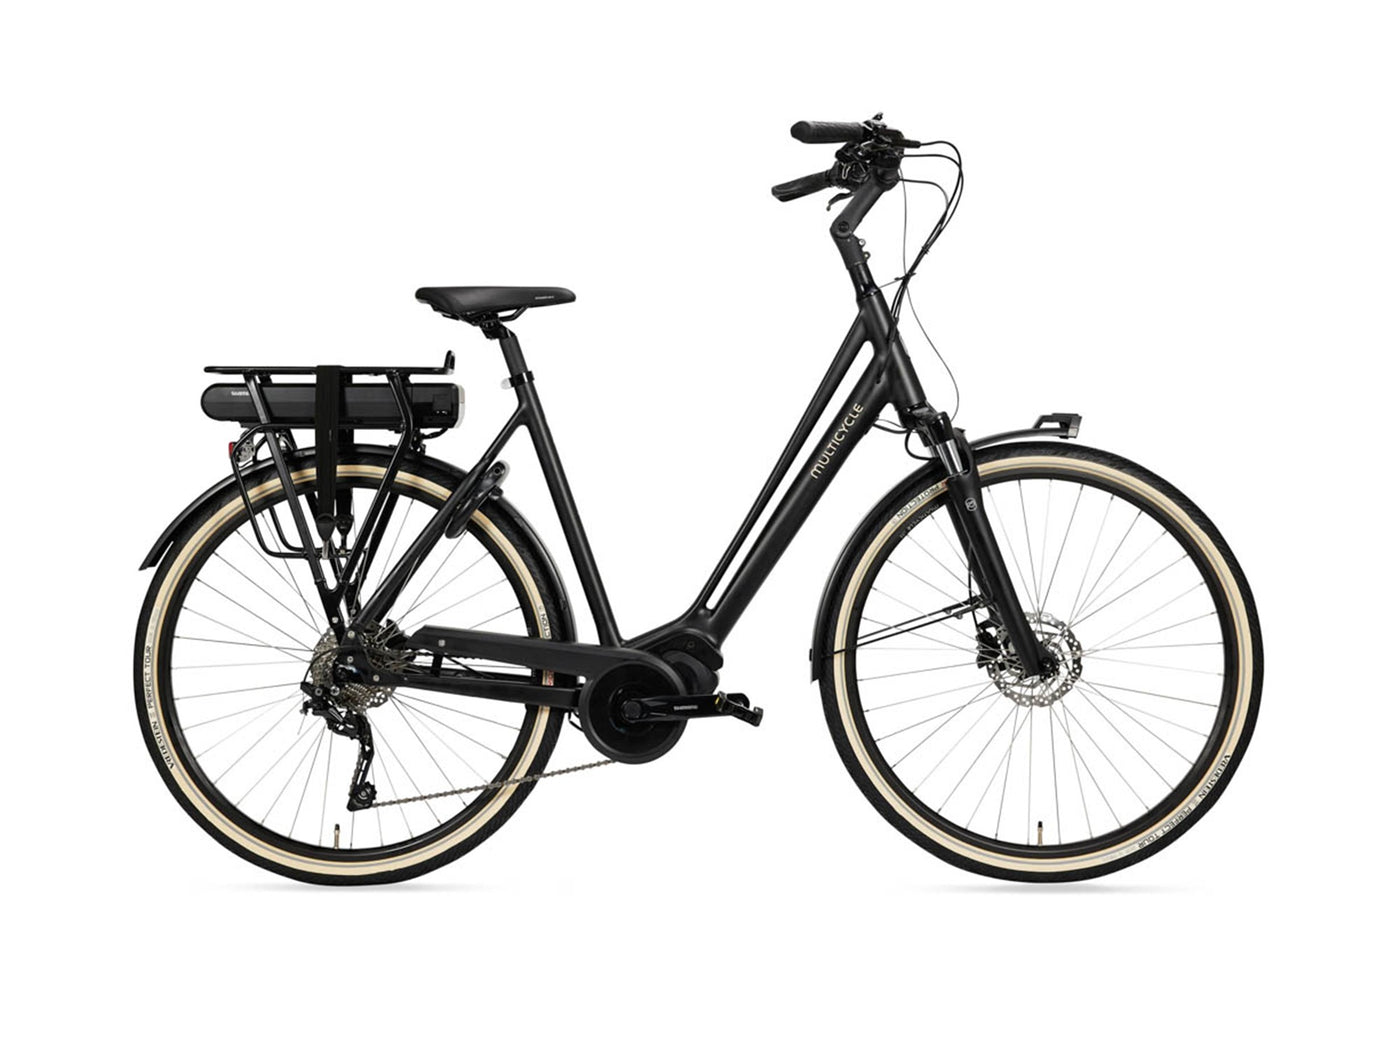 MULTICYCLE SOLO EMS 400wh Step Through